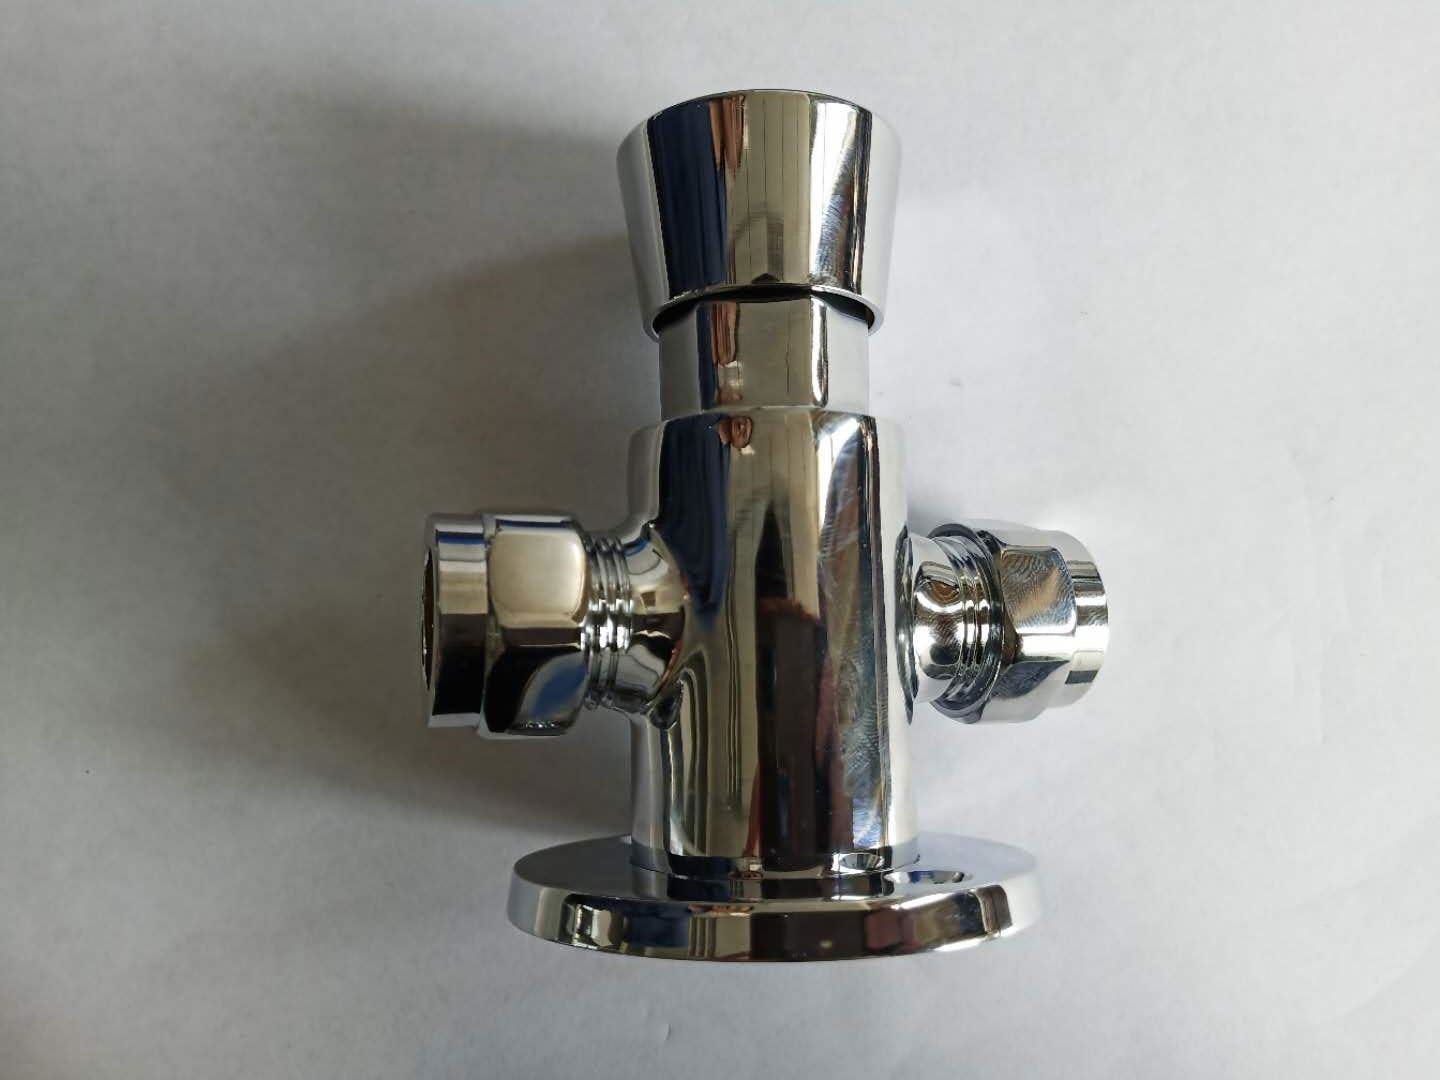 Time Delay Push Button Water Save Brass Chrome Plated Exposed Shower Valve 2